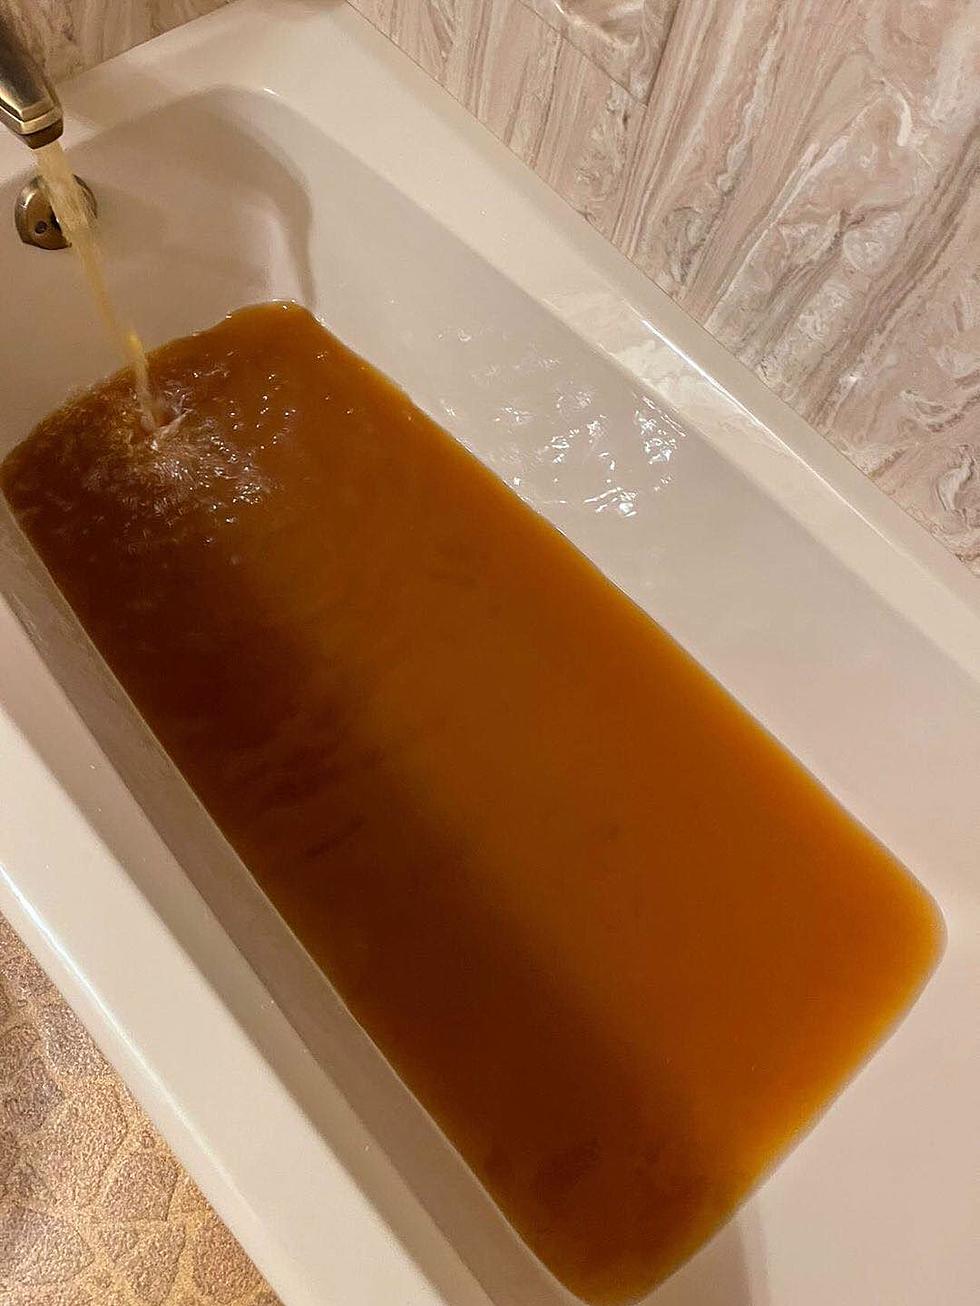 Sunset Residents Express Major Concerns Over Alleged Putrid Tap Water Conditions